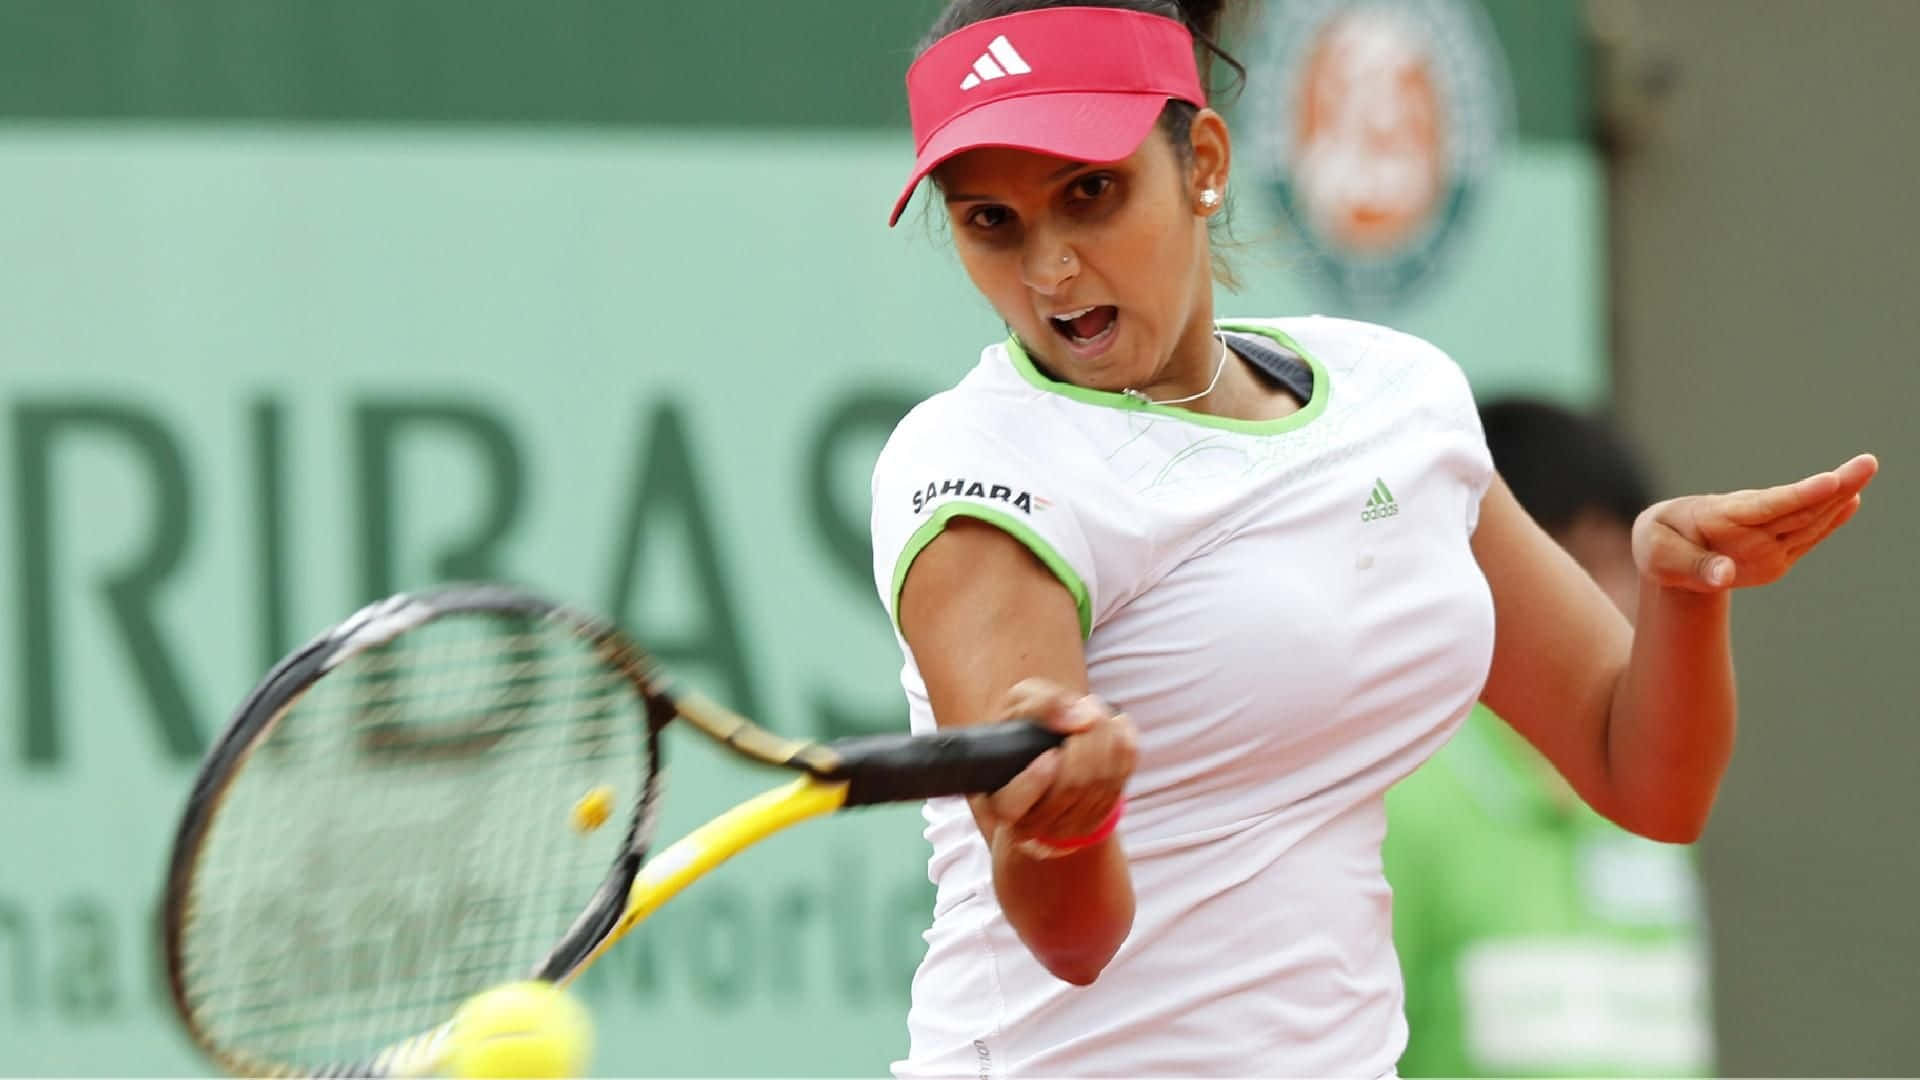 Hd Indian Tennis Player Sania Mirza Background